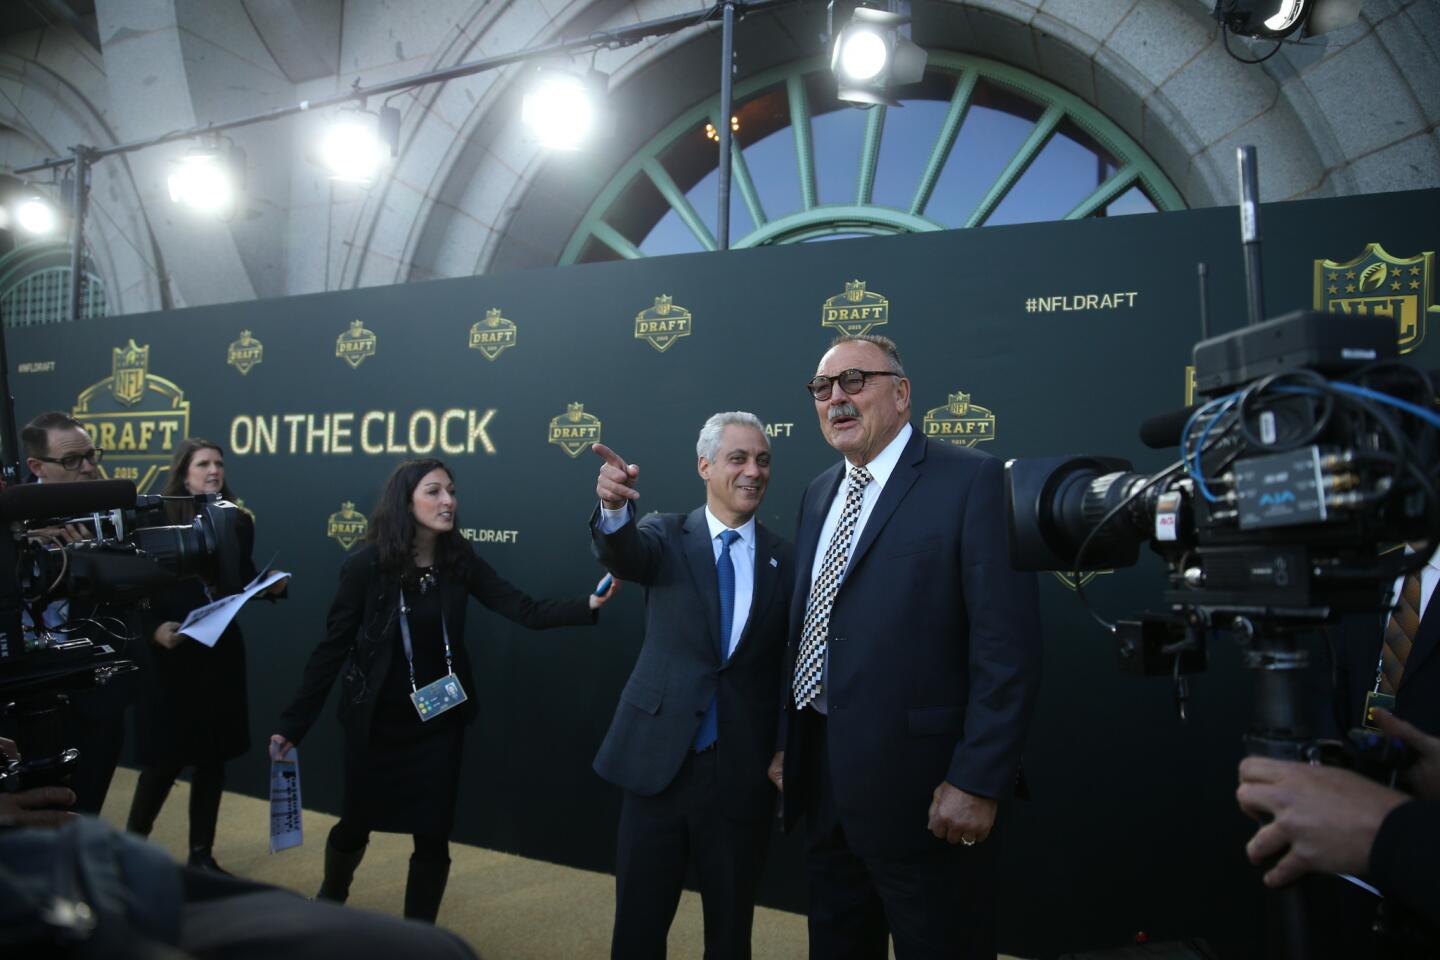 Chicago Mayor Rahm Emanuel and Dick Butkus arrive at the "Gold Carpet" at the Auditorium Theater for the 2015 NFL draft.